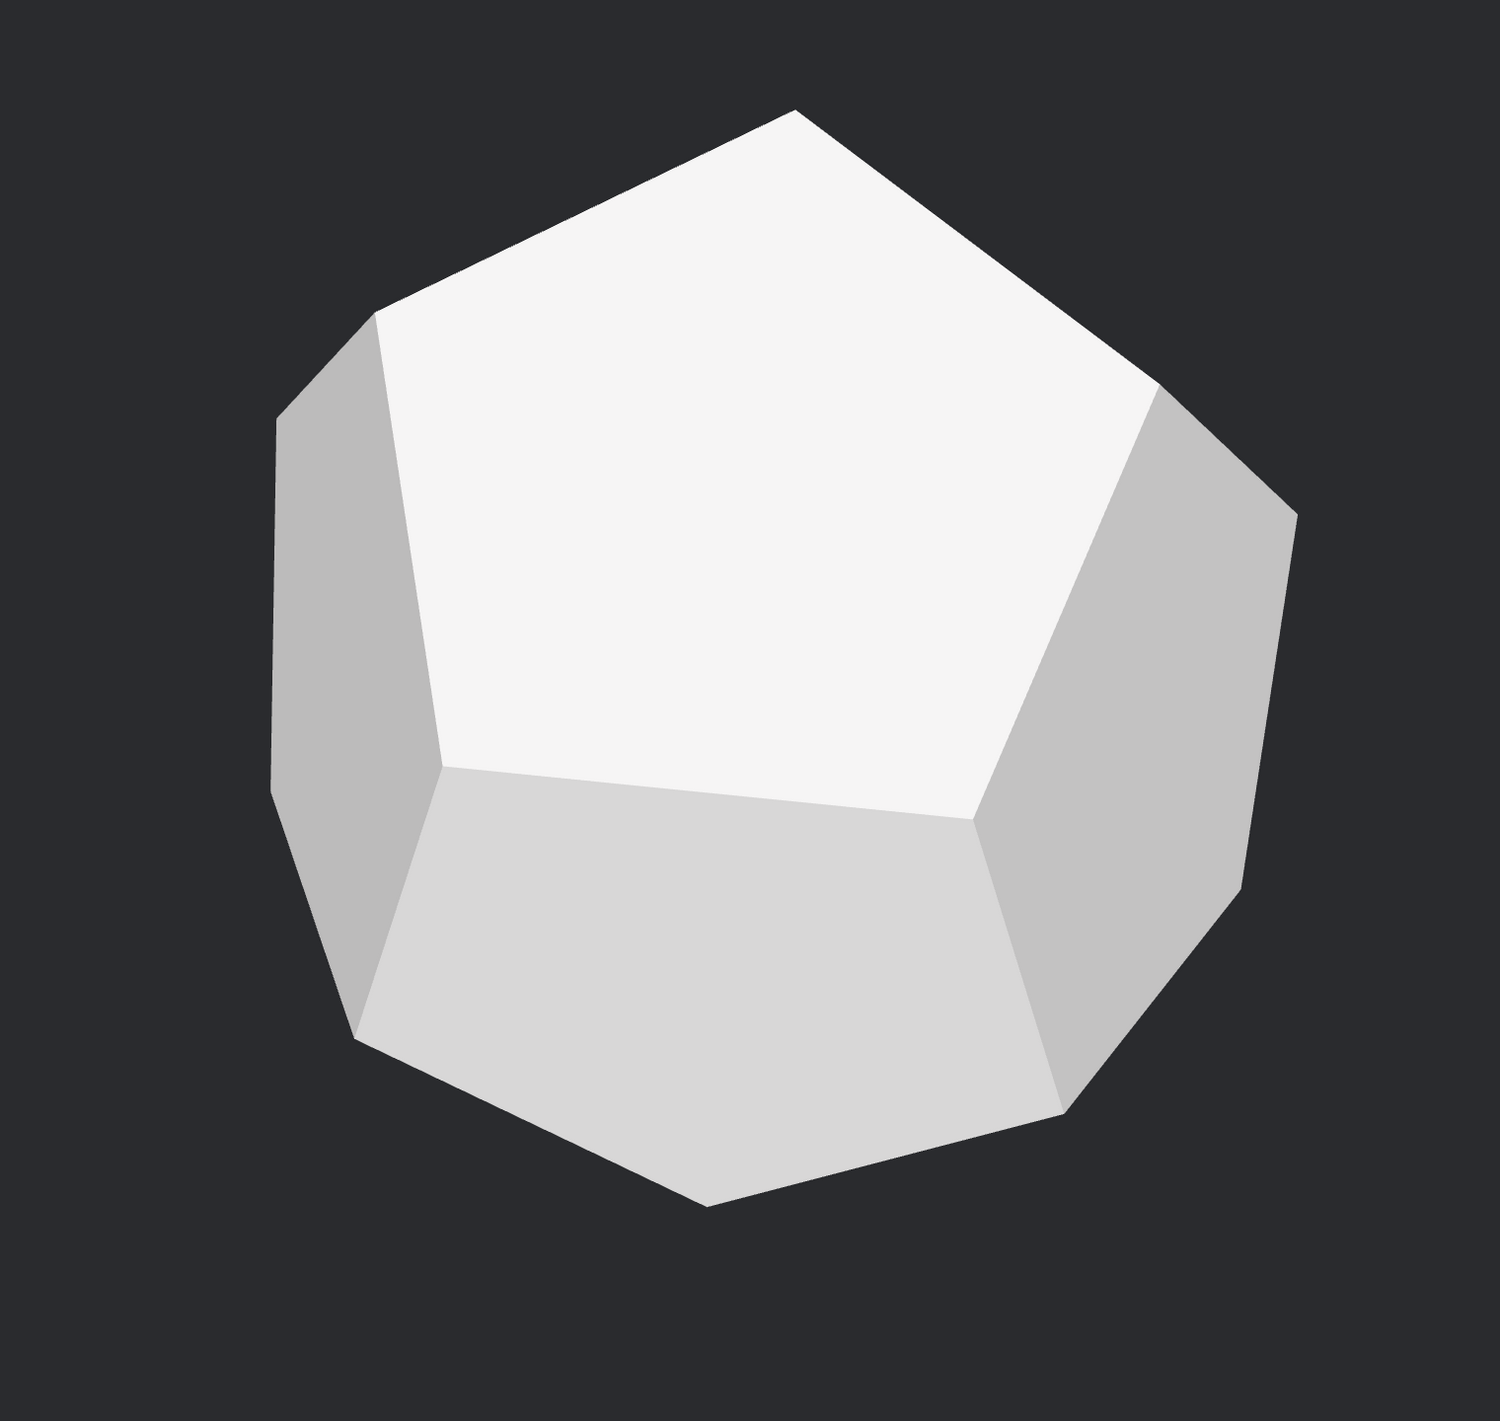 Light-colored 3D model of a dodecahedron against a dark background